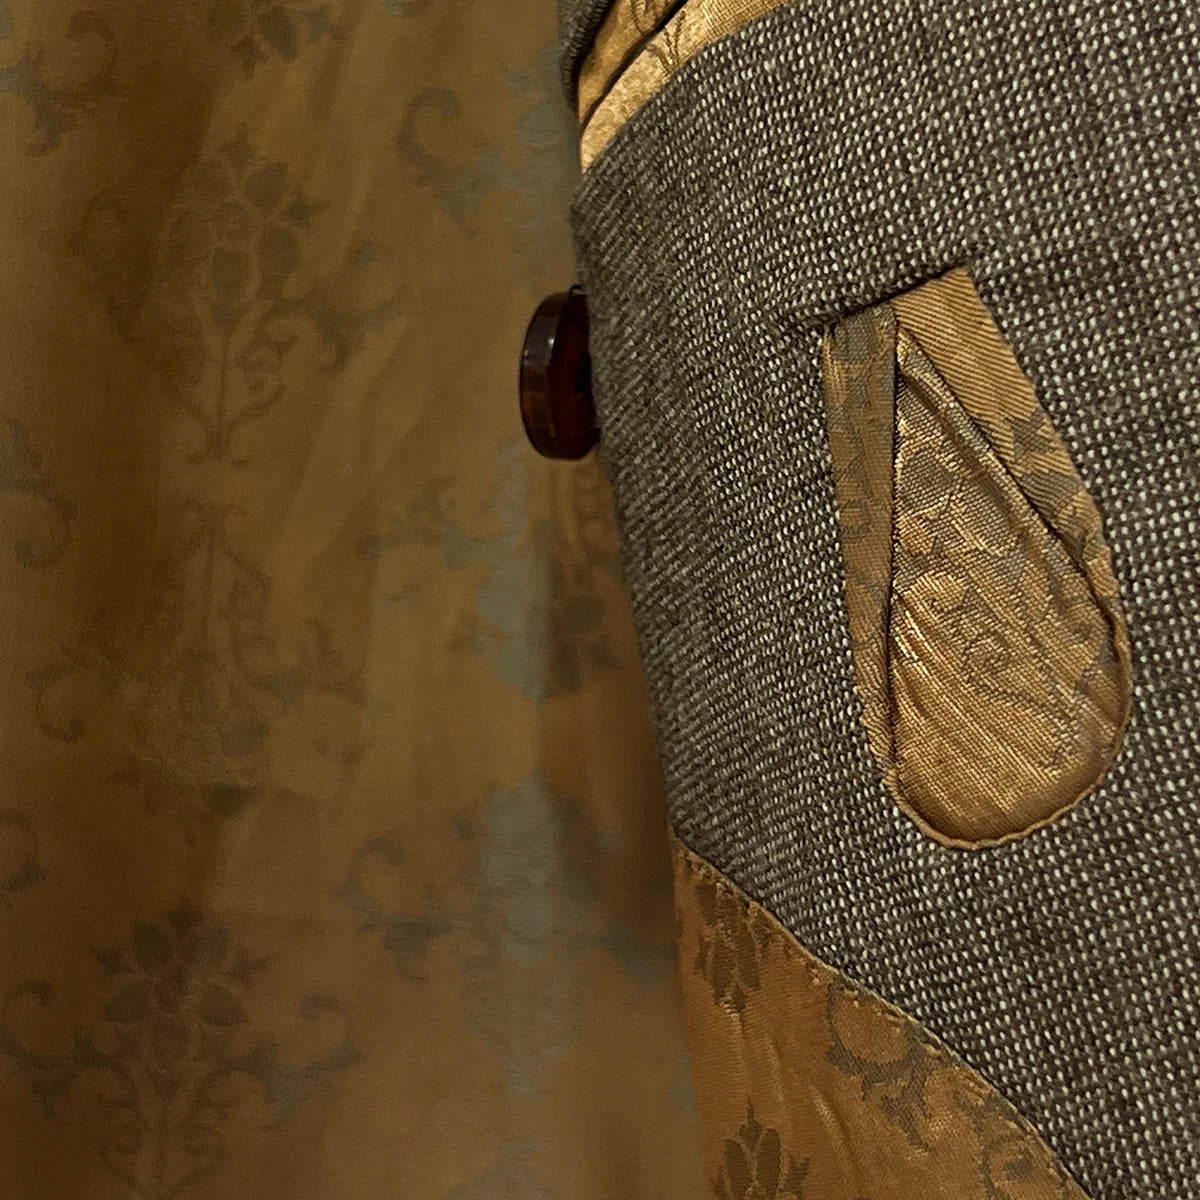 View of the flash linings inside the Westwood Hart brown nailhead men's suit jacket, featuring a luxurious gold patterned design.